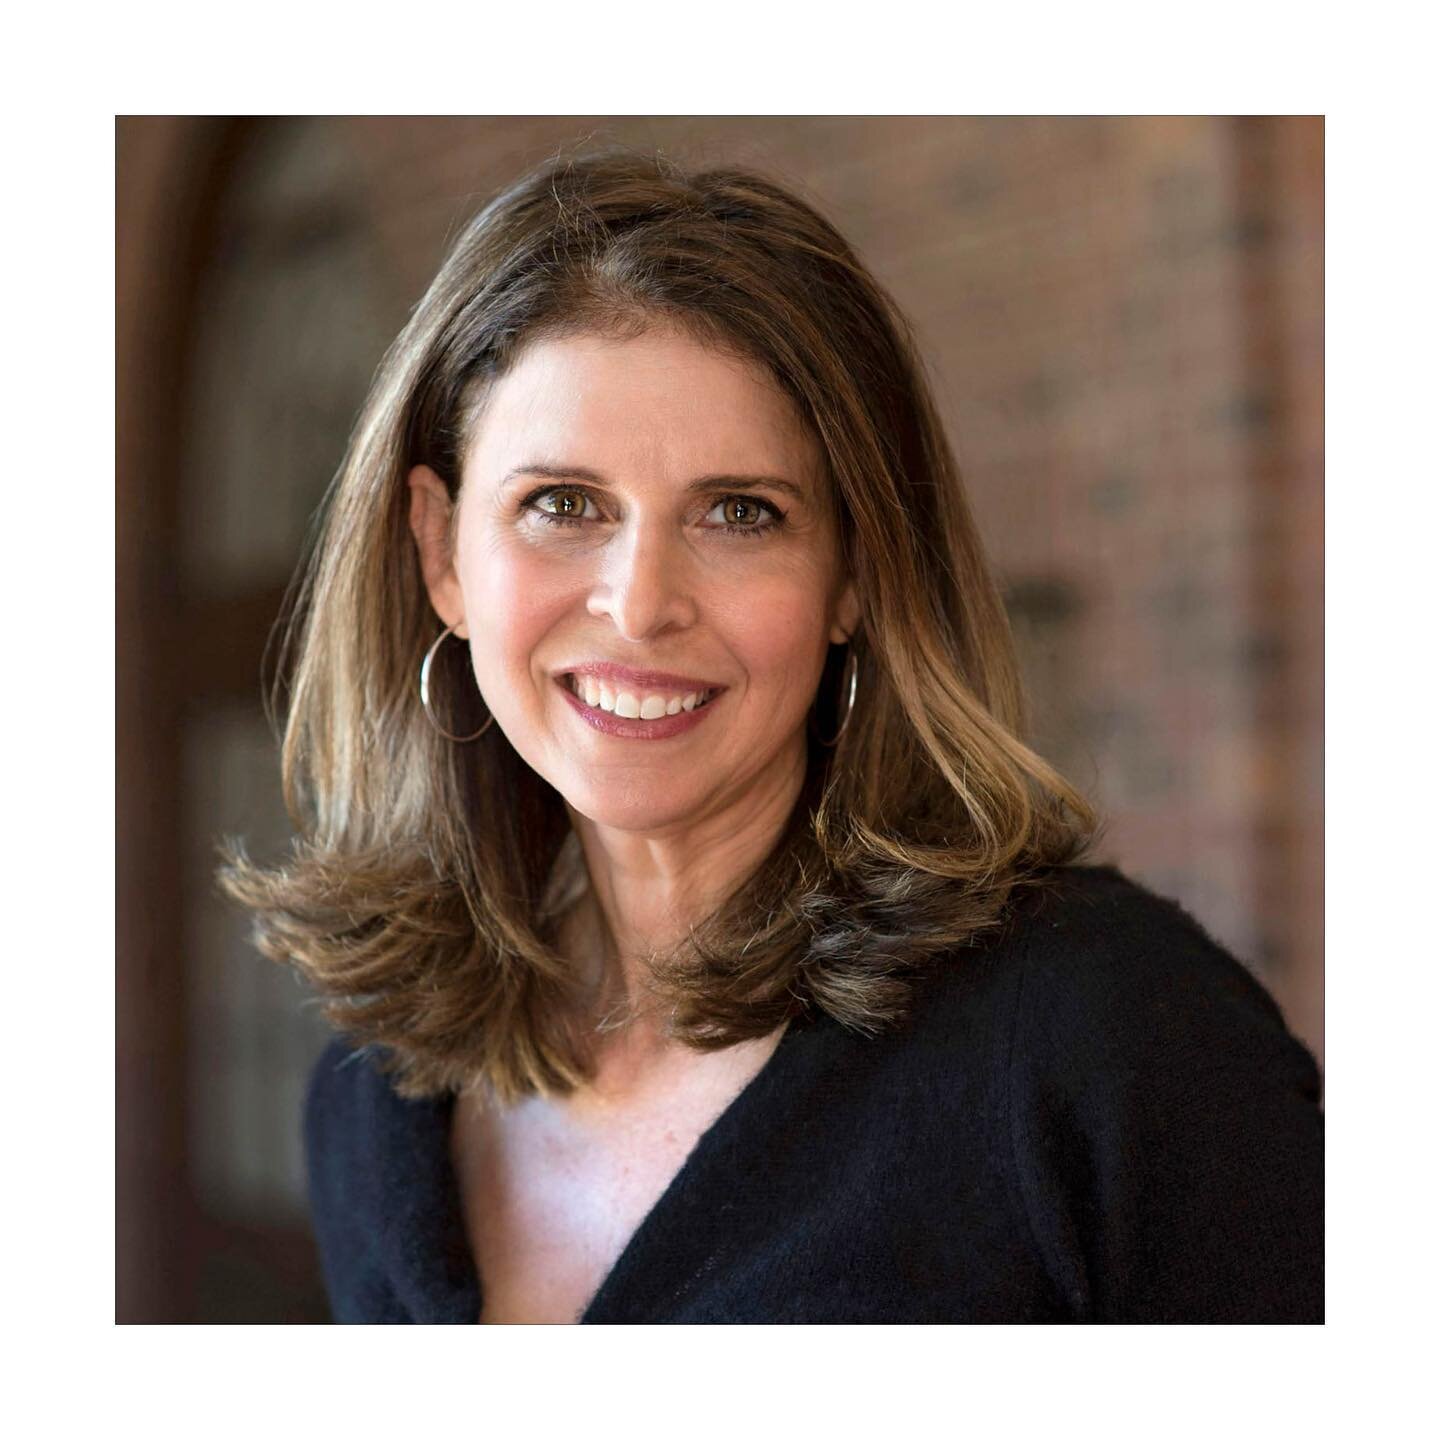 Meet @brainwashedmovie interviewee Amy Ziering!

Amy Ziering is a two-time Emmy award-winning and Academy award-nominated investigative filmmaker behind some of the most groundbreaking documentaries today with her creative partner Kirby Dick. Her mos